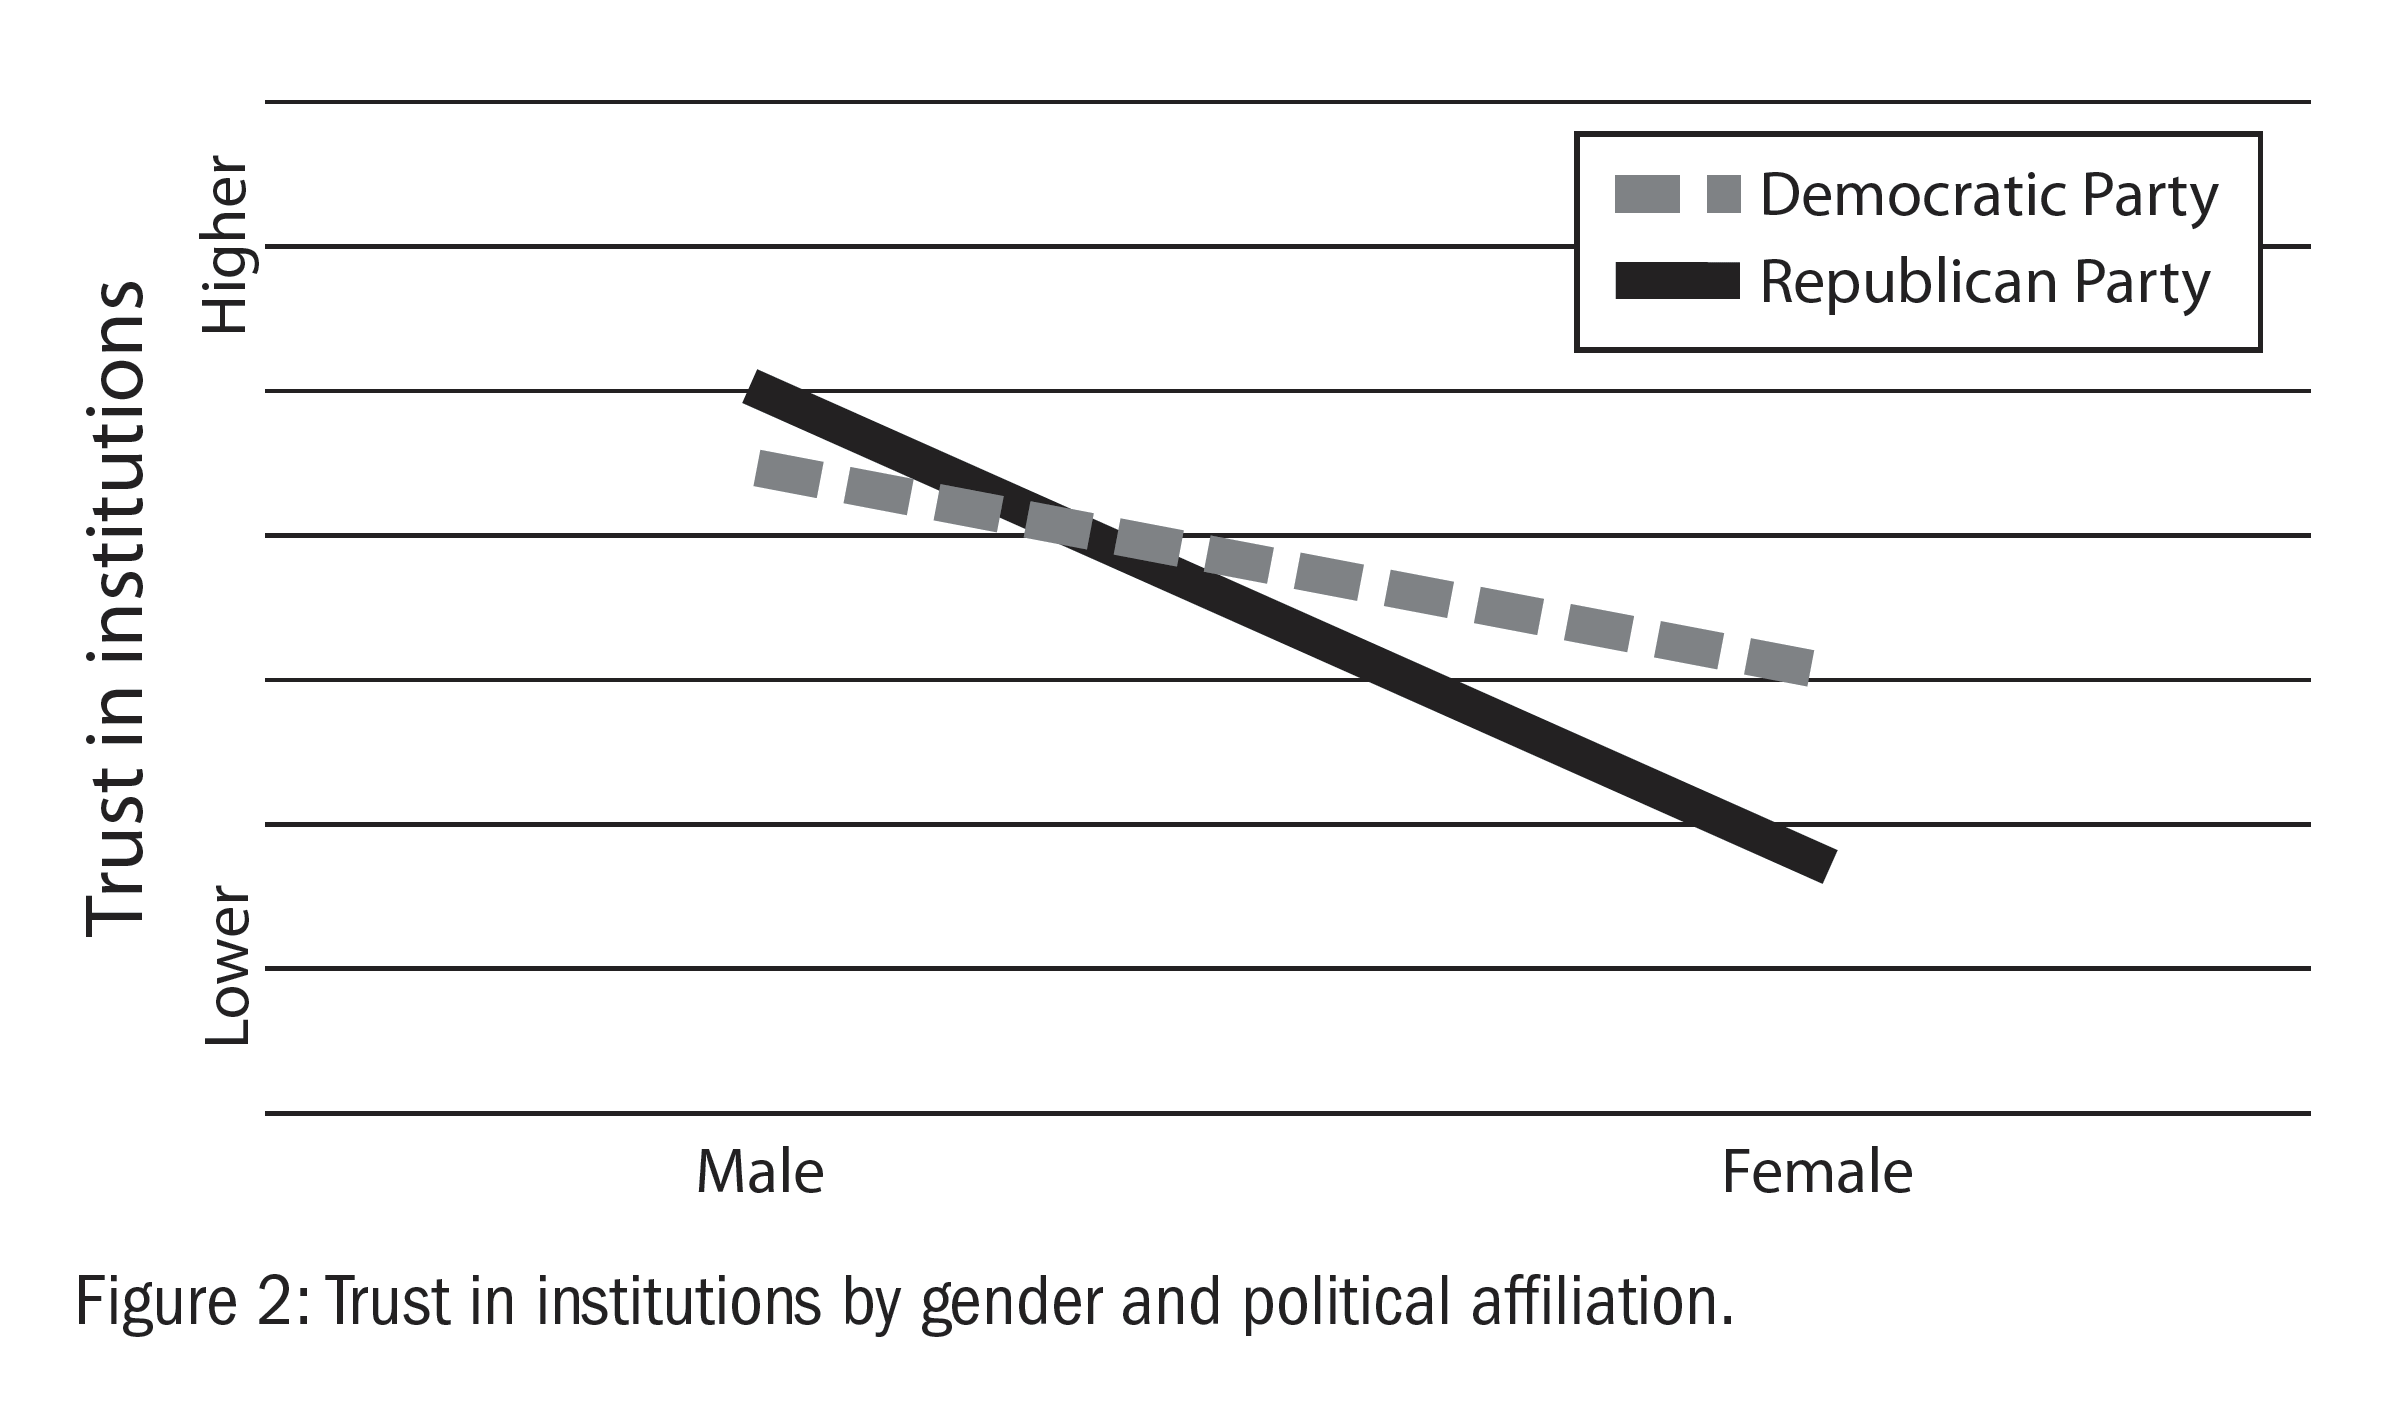 Figure 2: Trust in institutions by gender and political affiliation